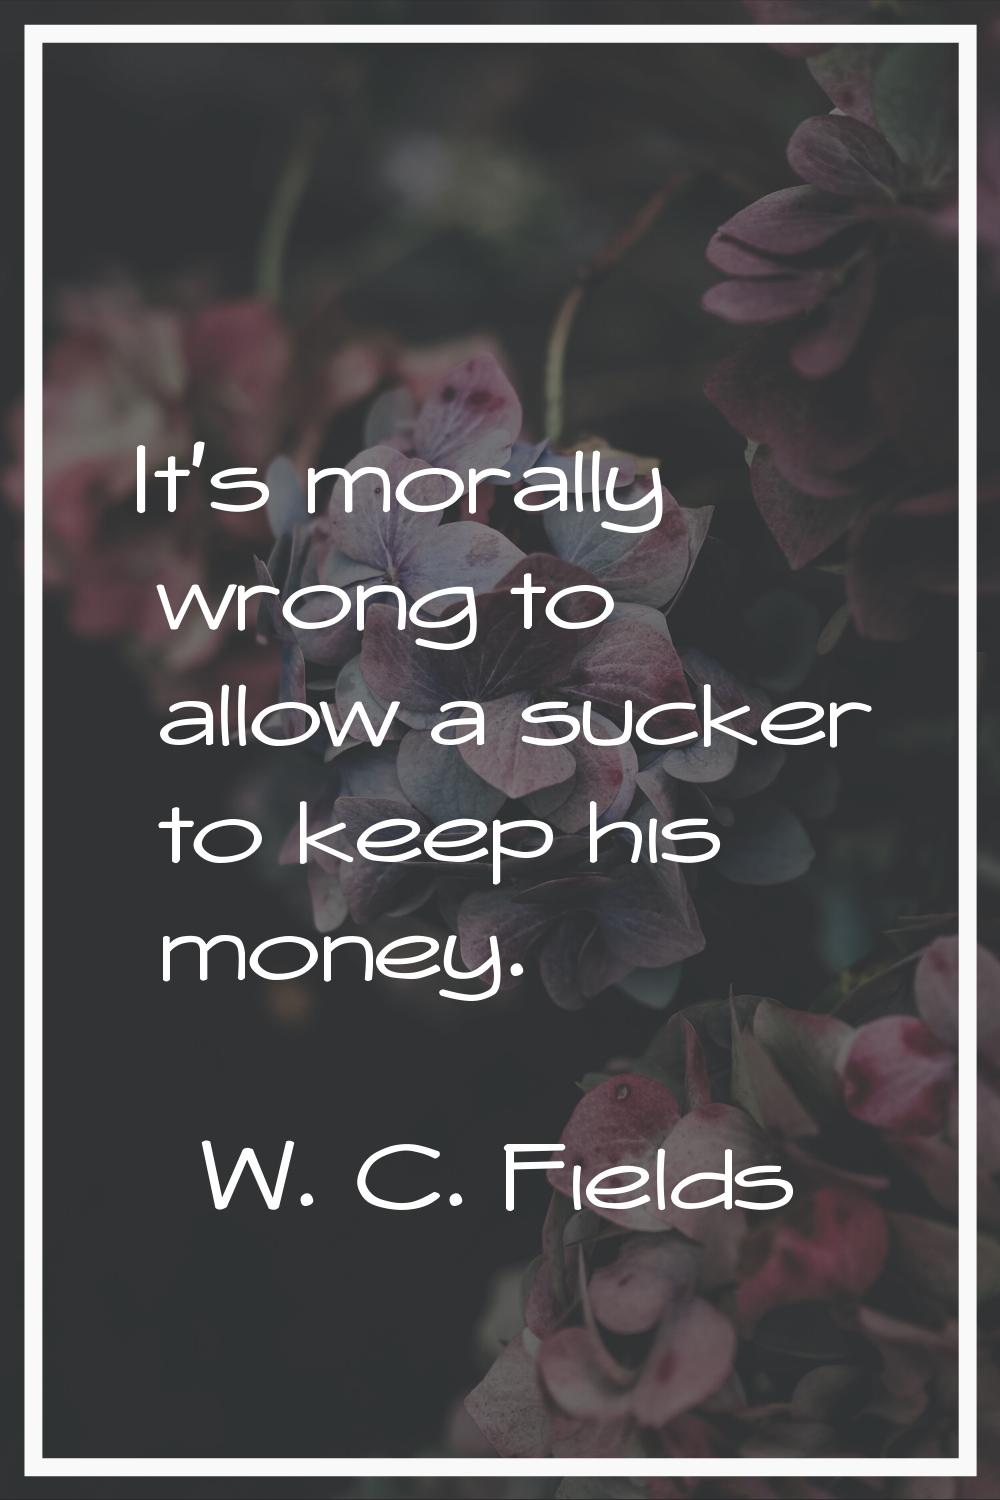 It's morally wrong to allow a sucker to keep his money.